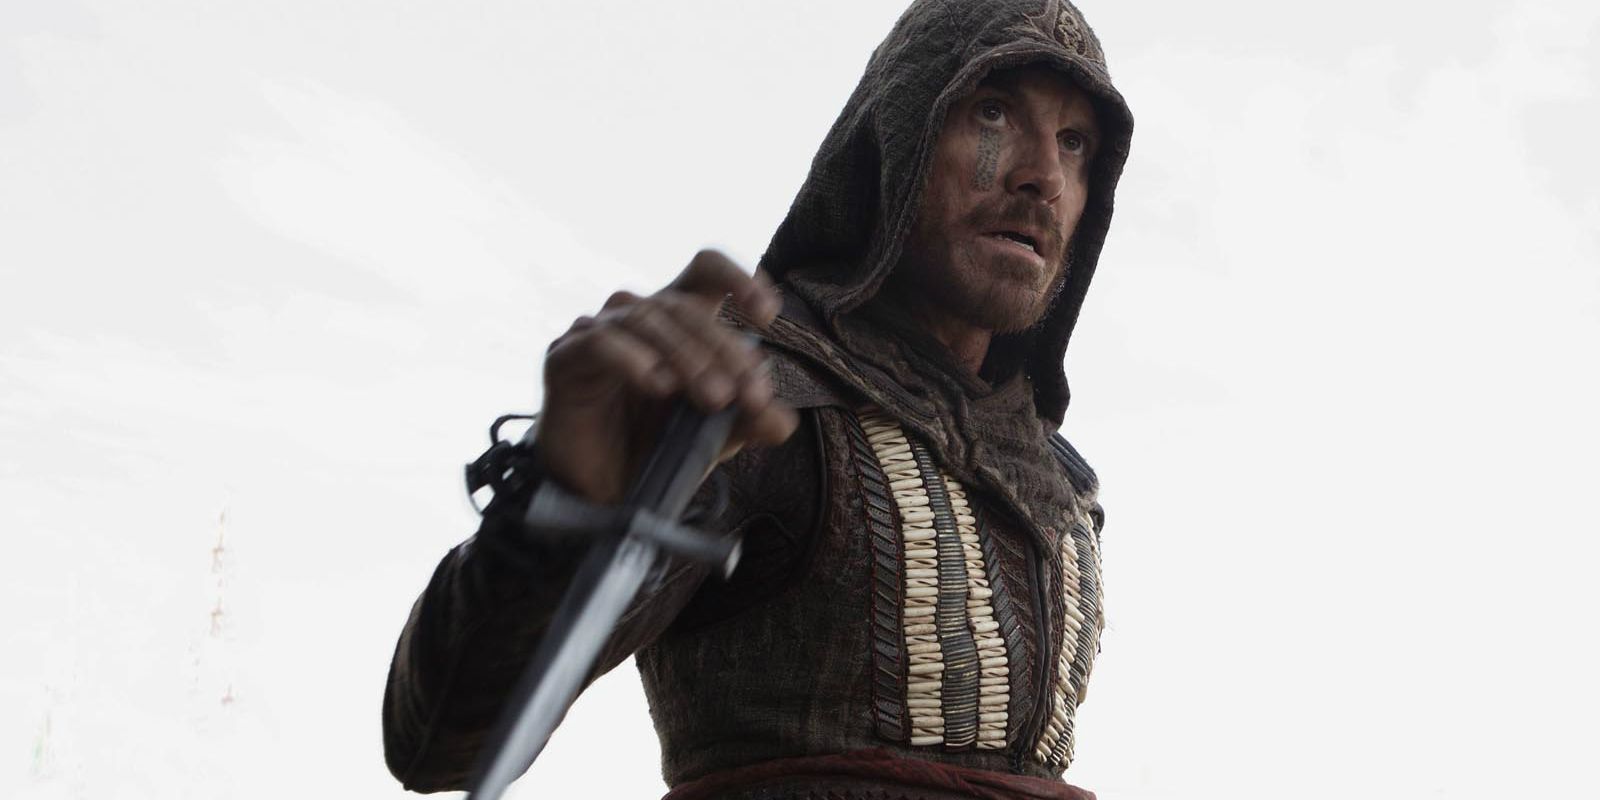 Assassin's Creed (2016) - Michael Fassbender with dagger